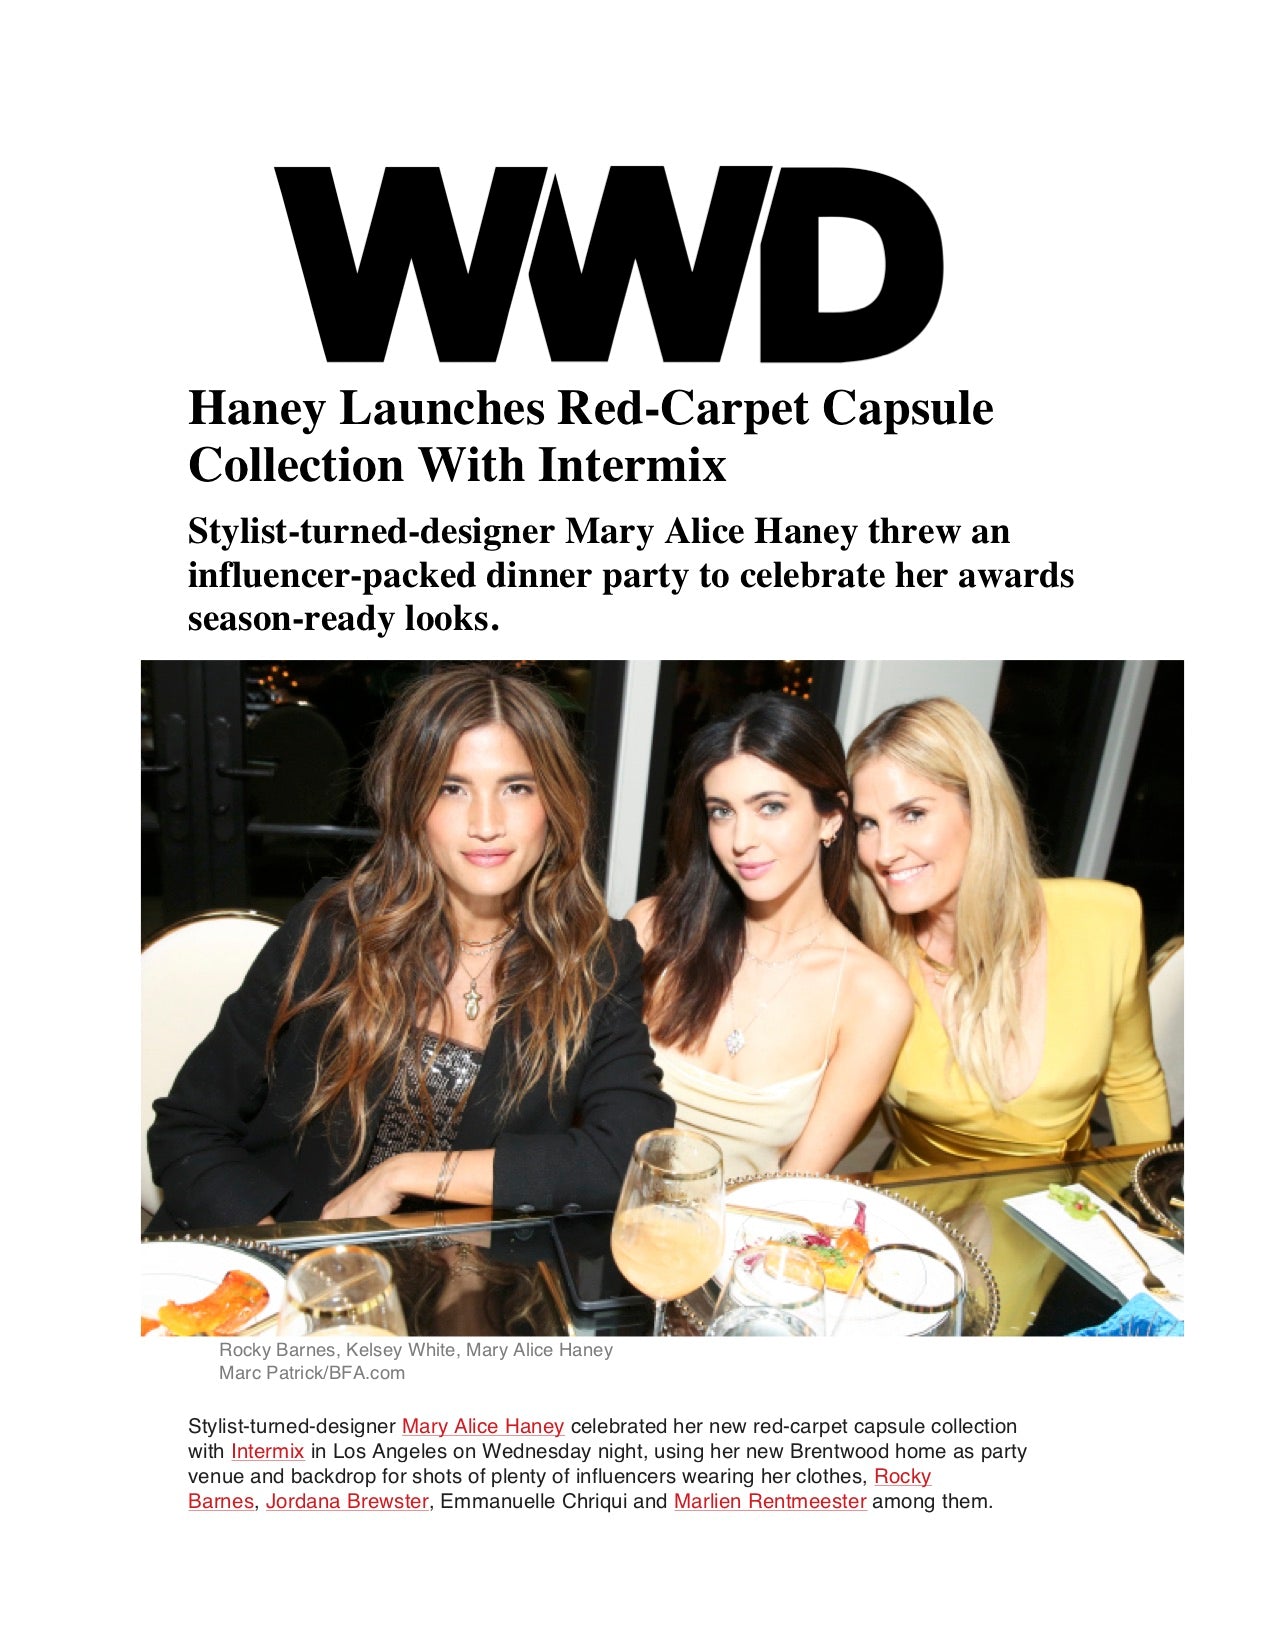 Haney Launches Red-Carpet Capsule Collection With Intermix